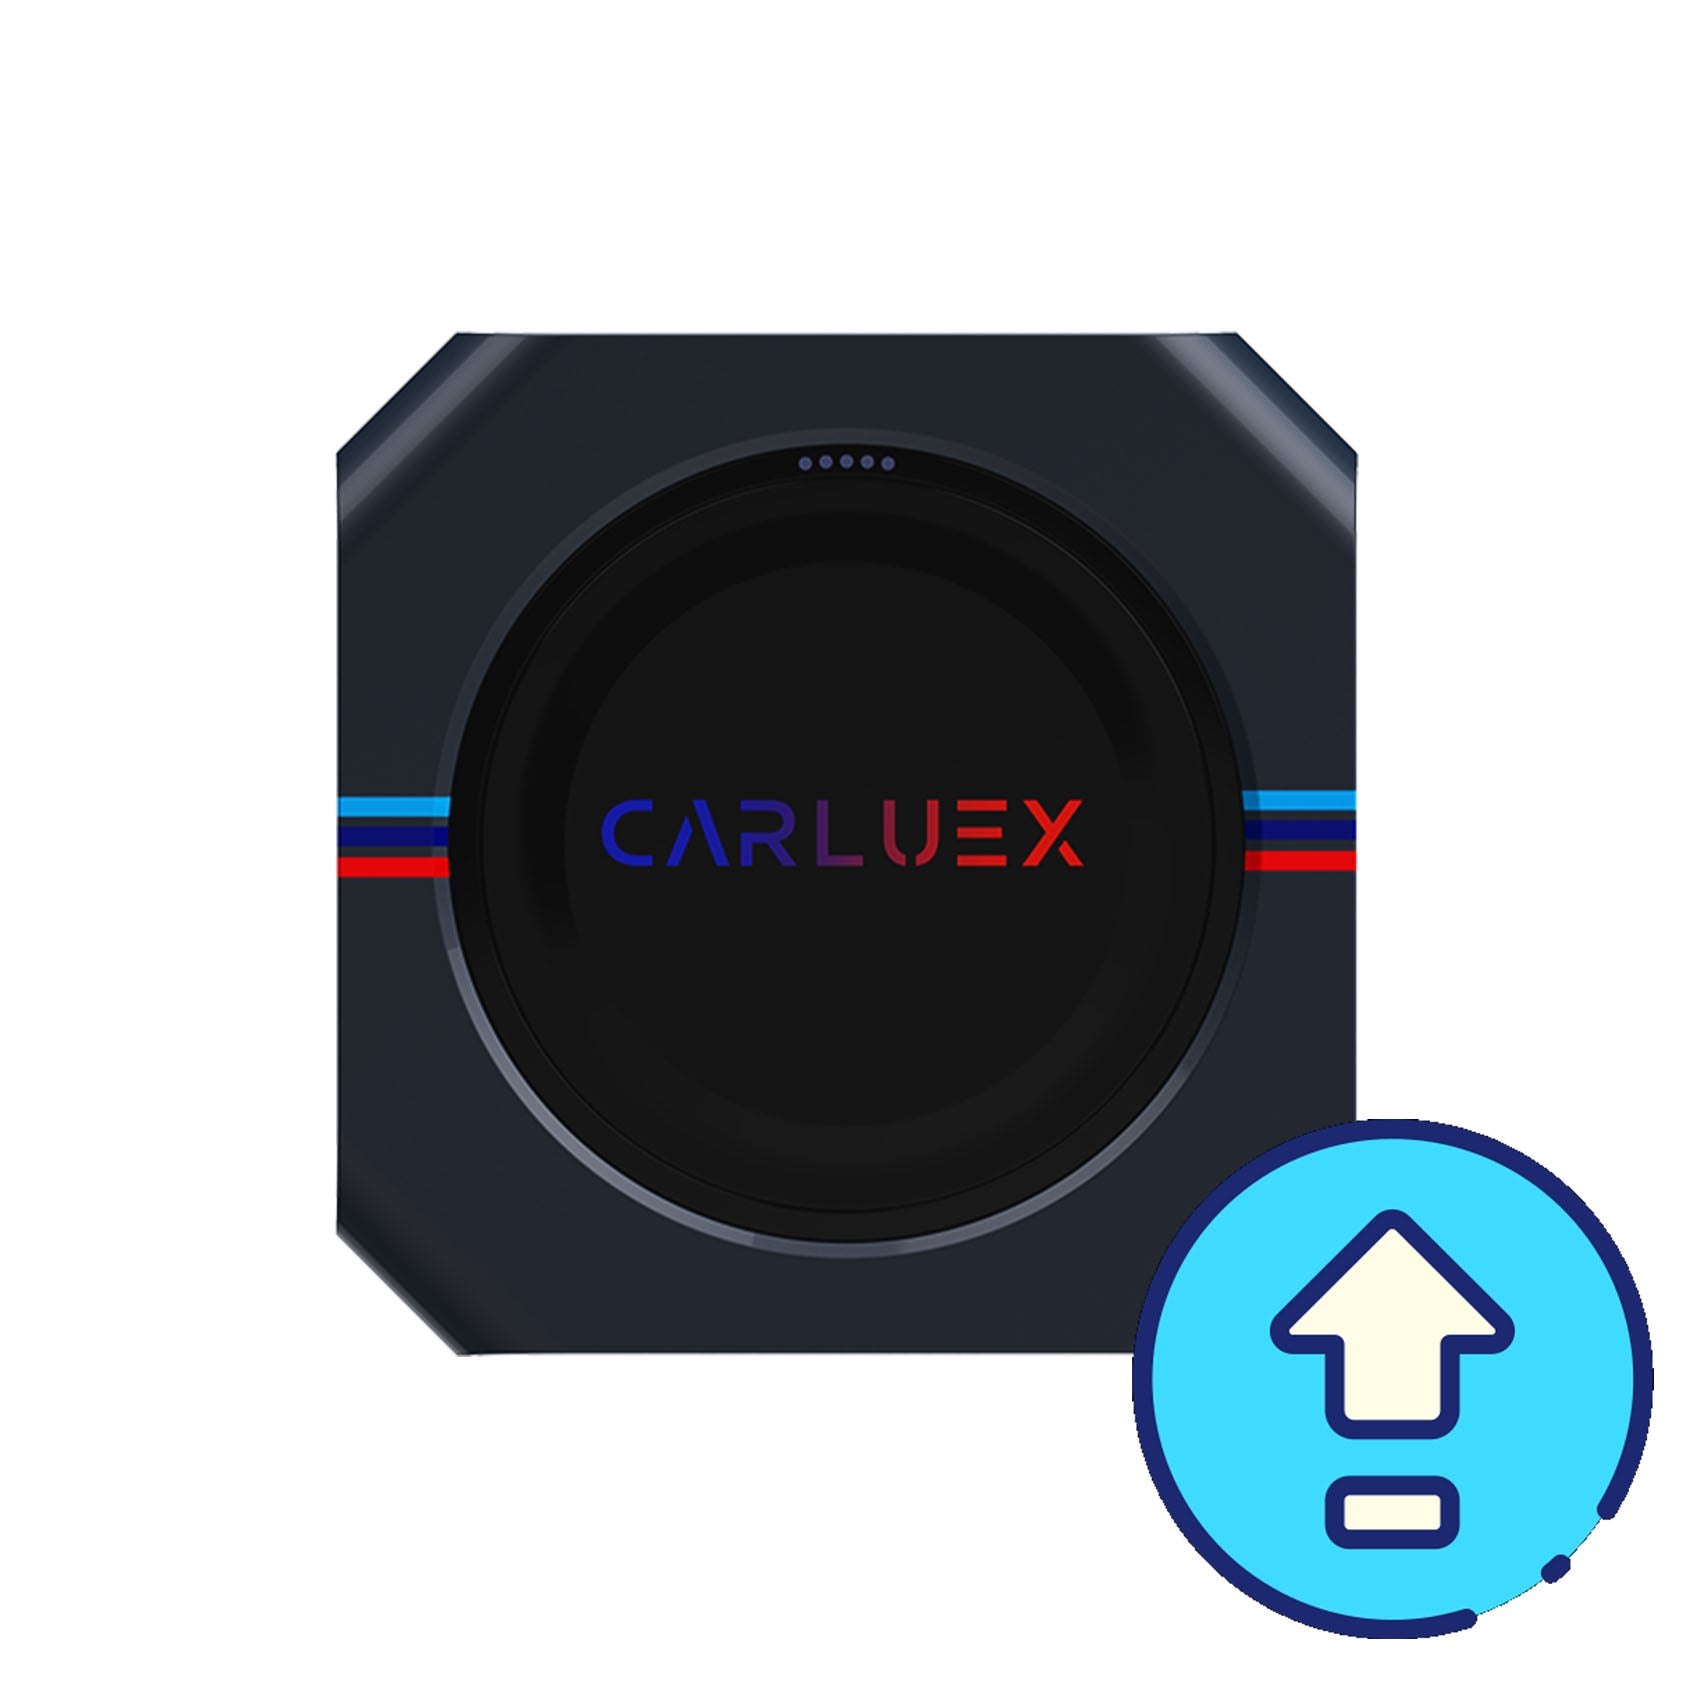 CARLUEX BMW 0422 Upgrade: Enhanced Features, Optimized Stability, and a Better User Experience